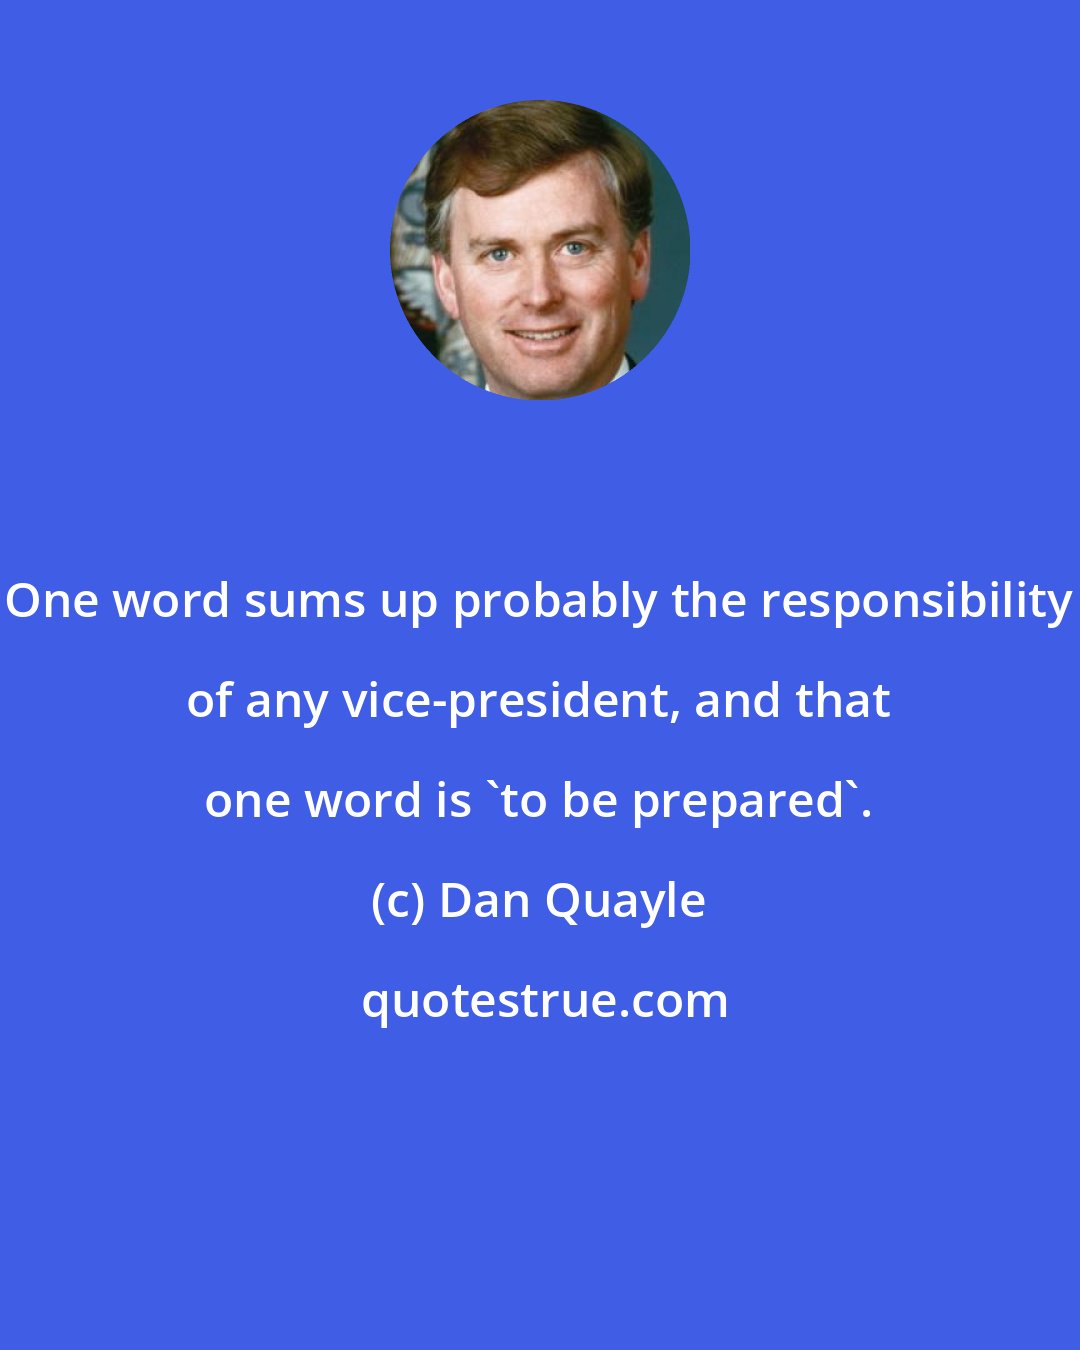 Dan Quayle: One word sums up probably the responsibility of any vice-president, and that one word is 'to be prepared'.